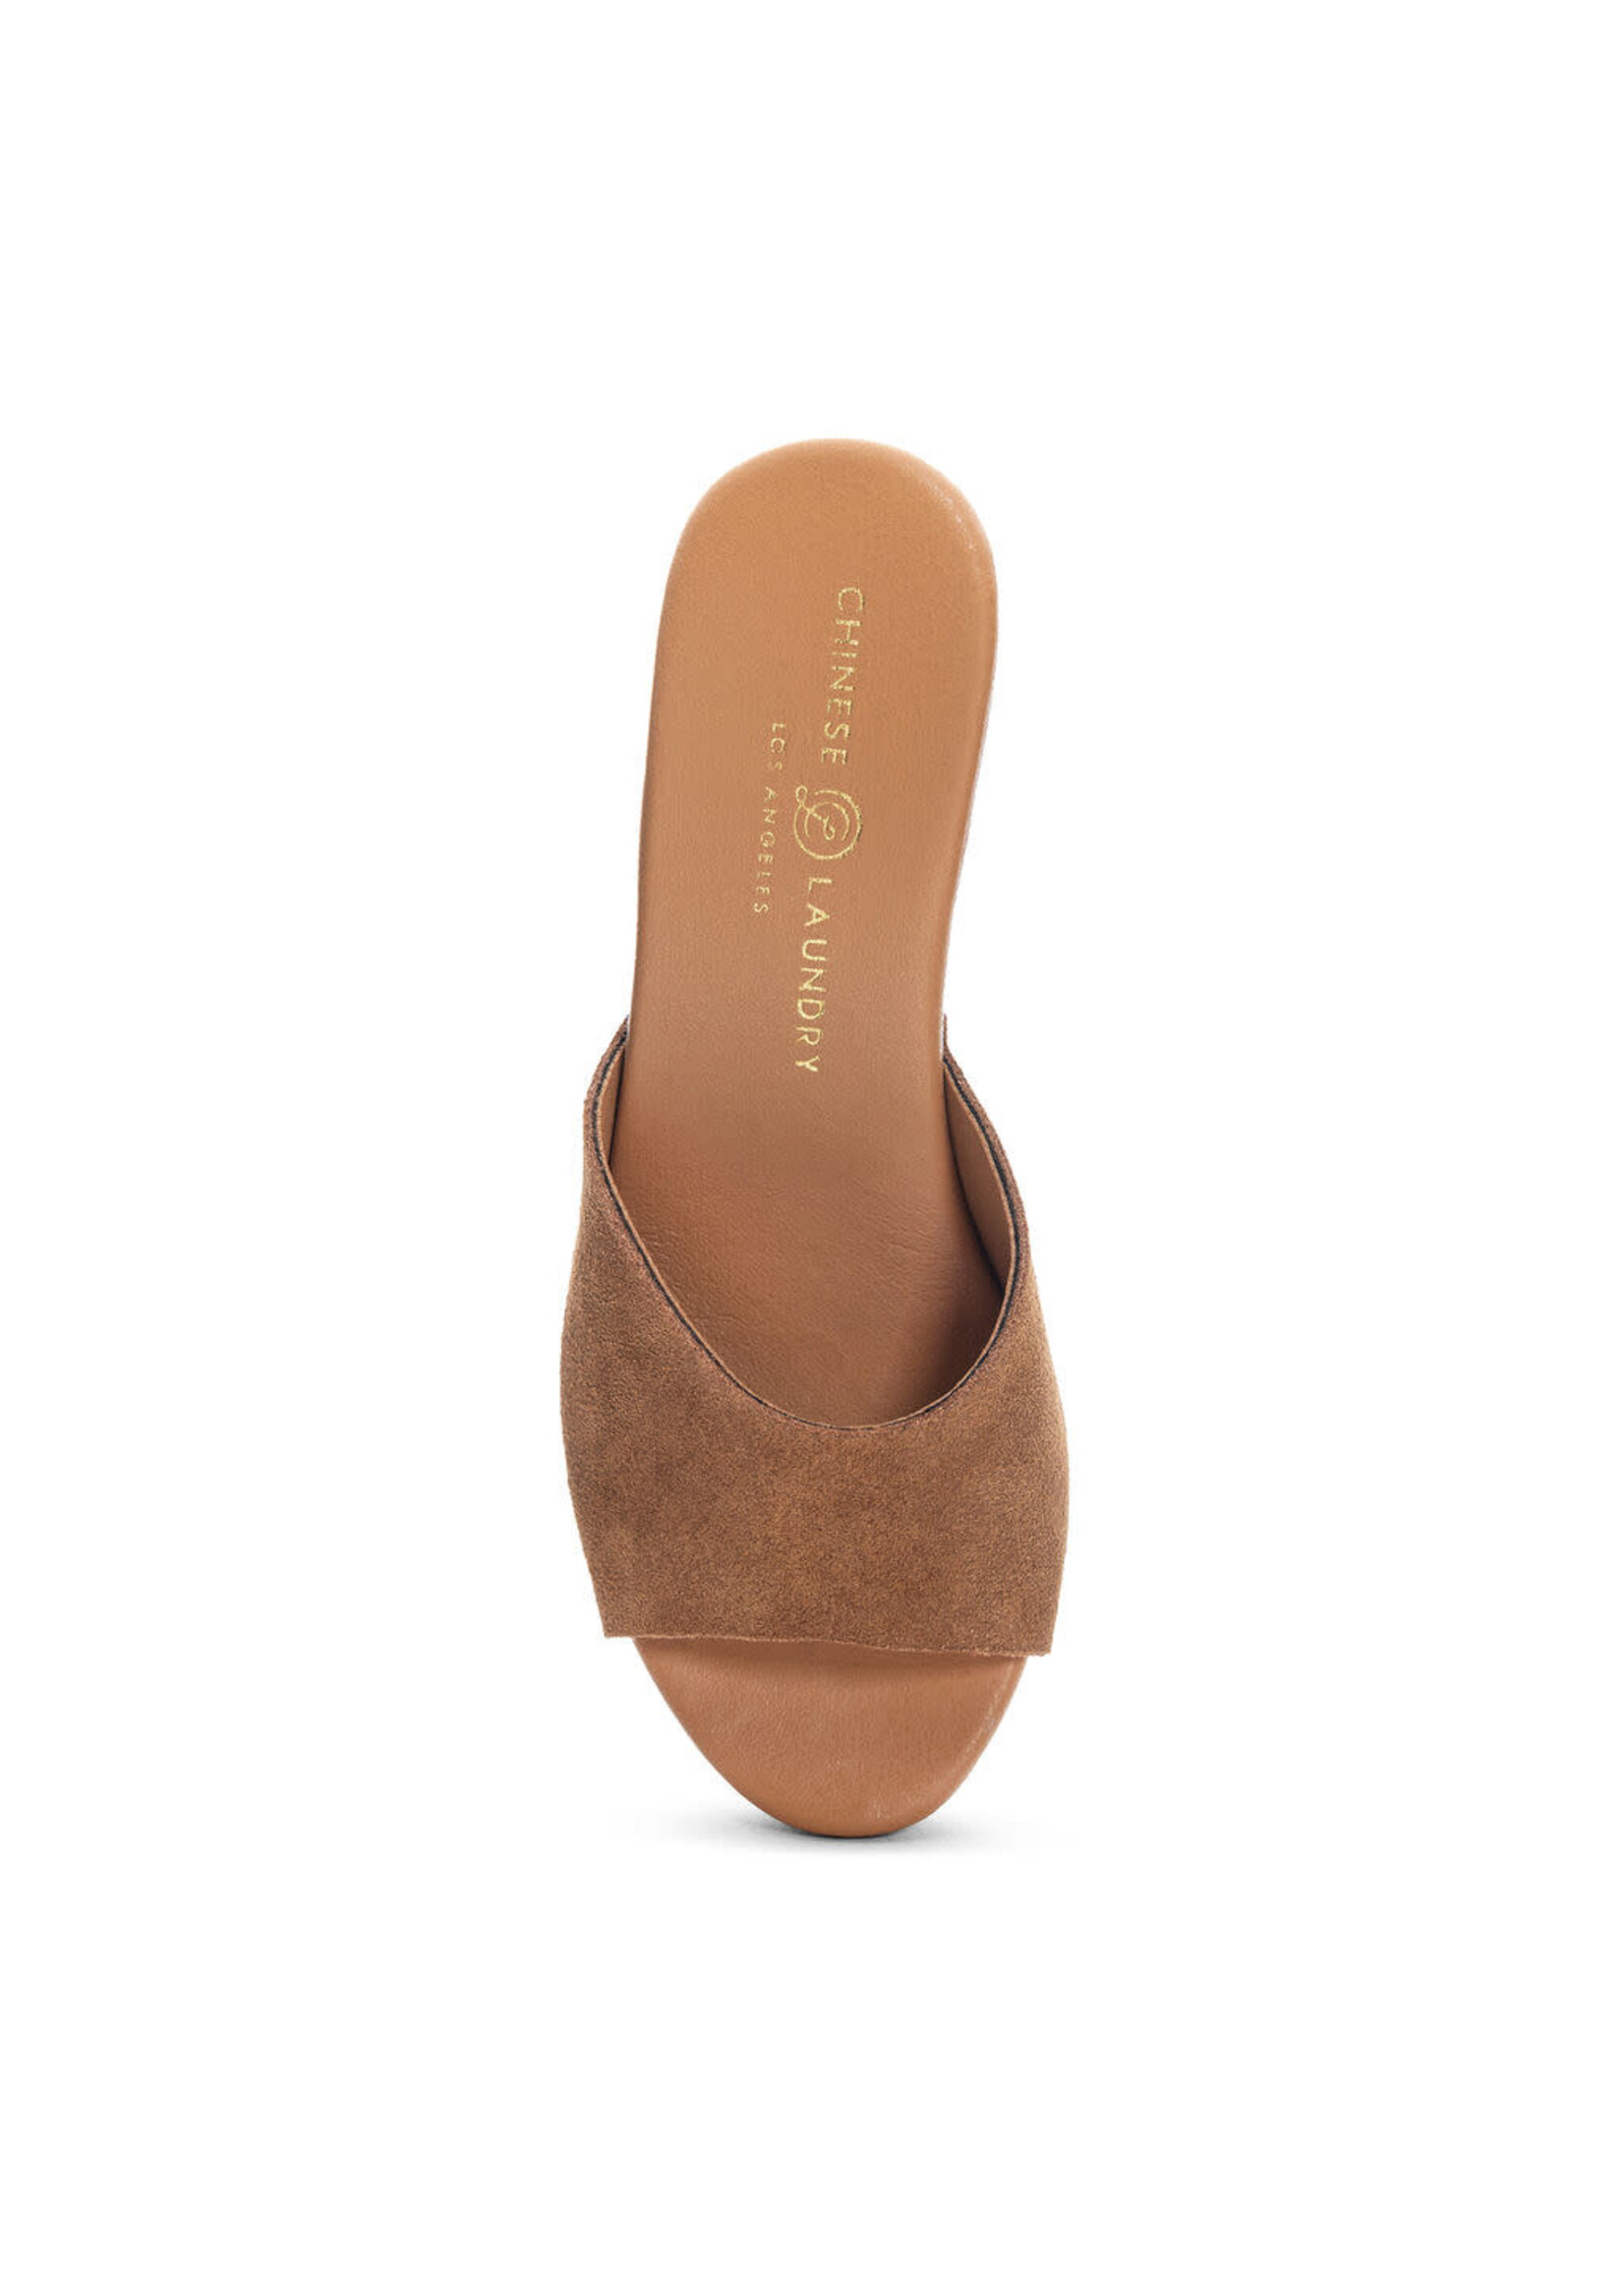 Chinese Laundry Forever Tan Suede by Chinese Laundry